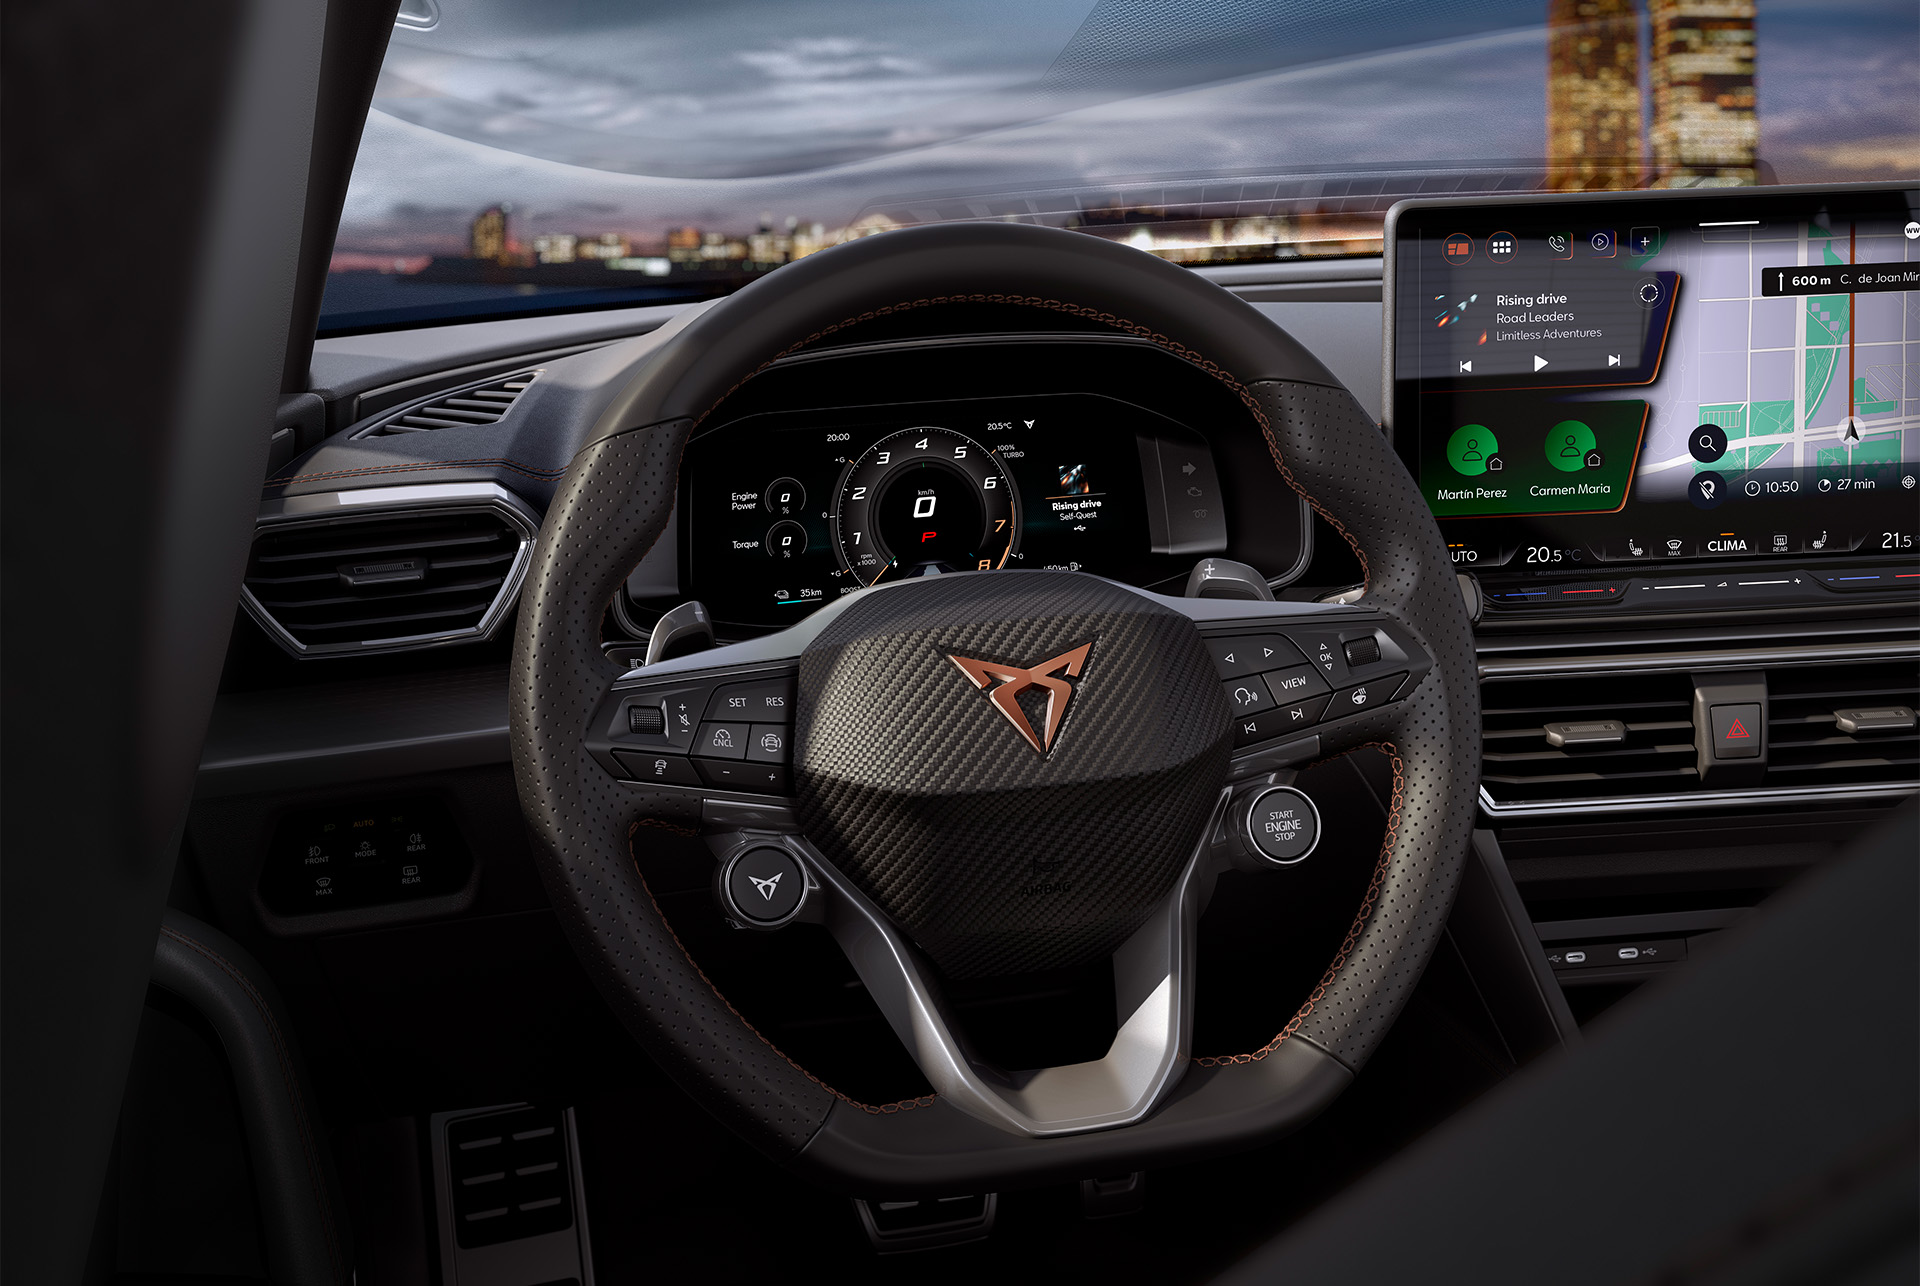 new cupra leon 2024 intelligent drive steering wheel with satellite controls,  safety technology advanced assistance systems, adaptive cruise control, lane keeping and live dynamic road sign display.